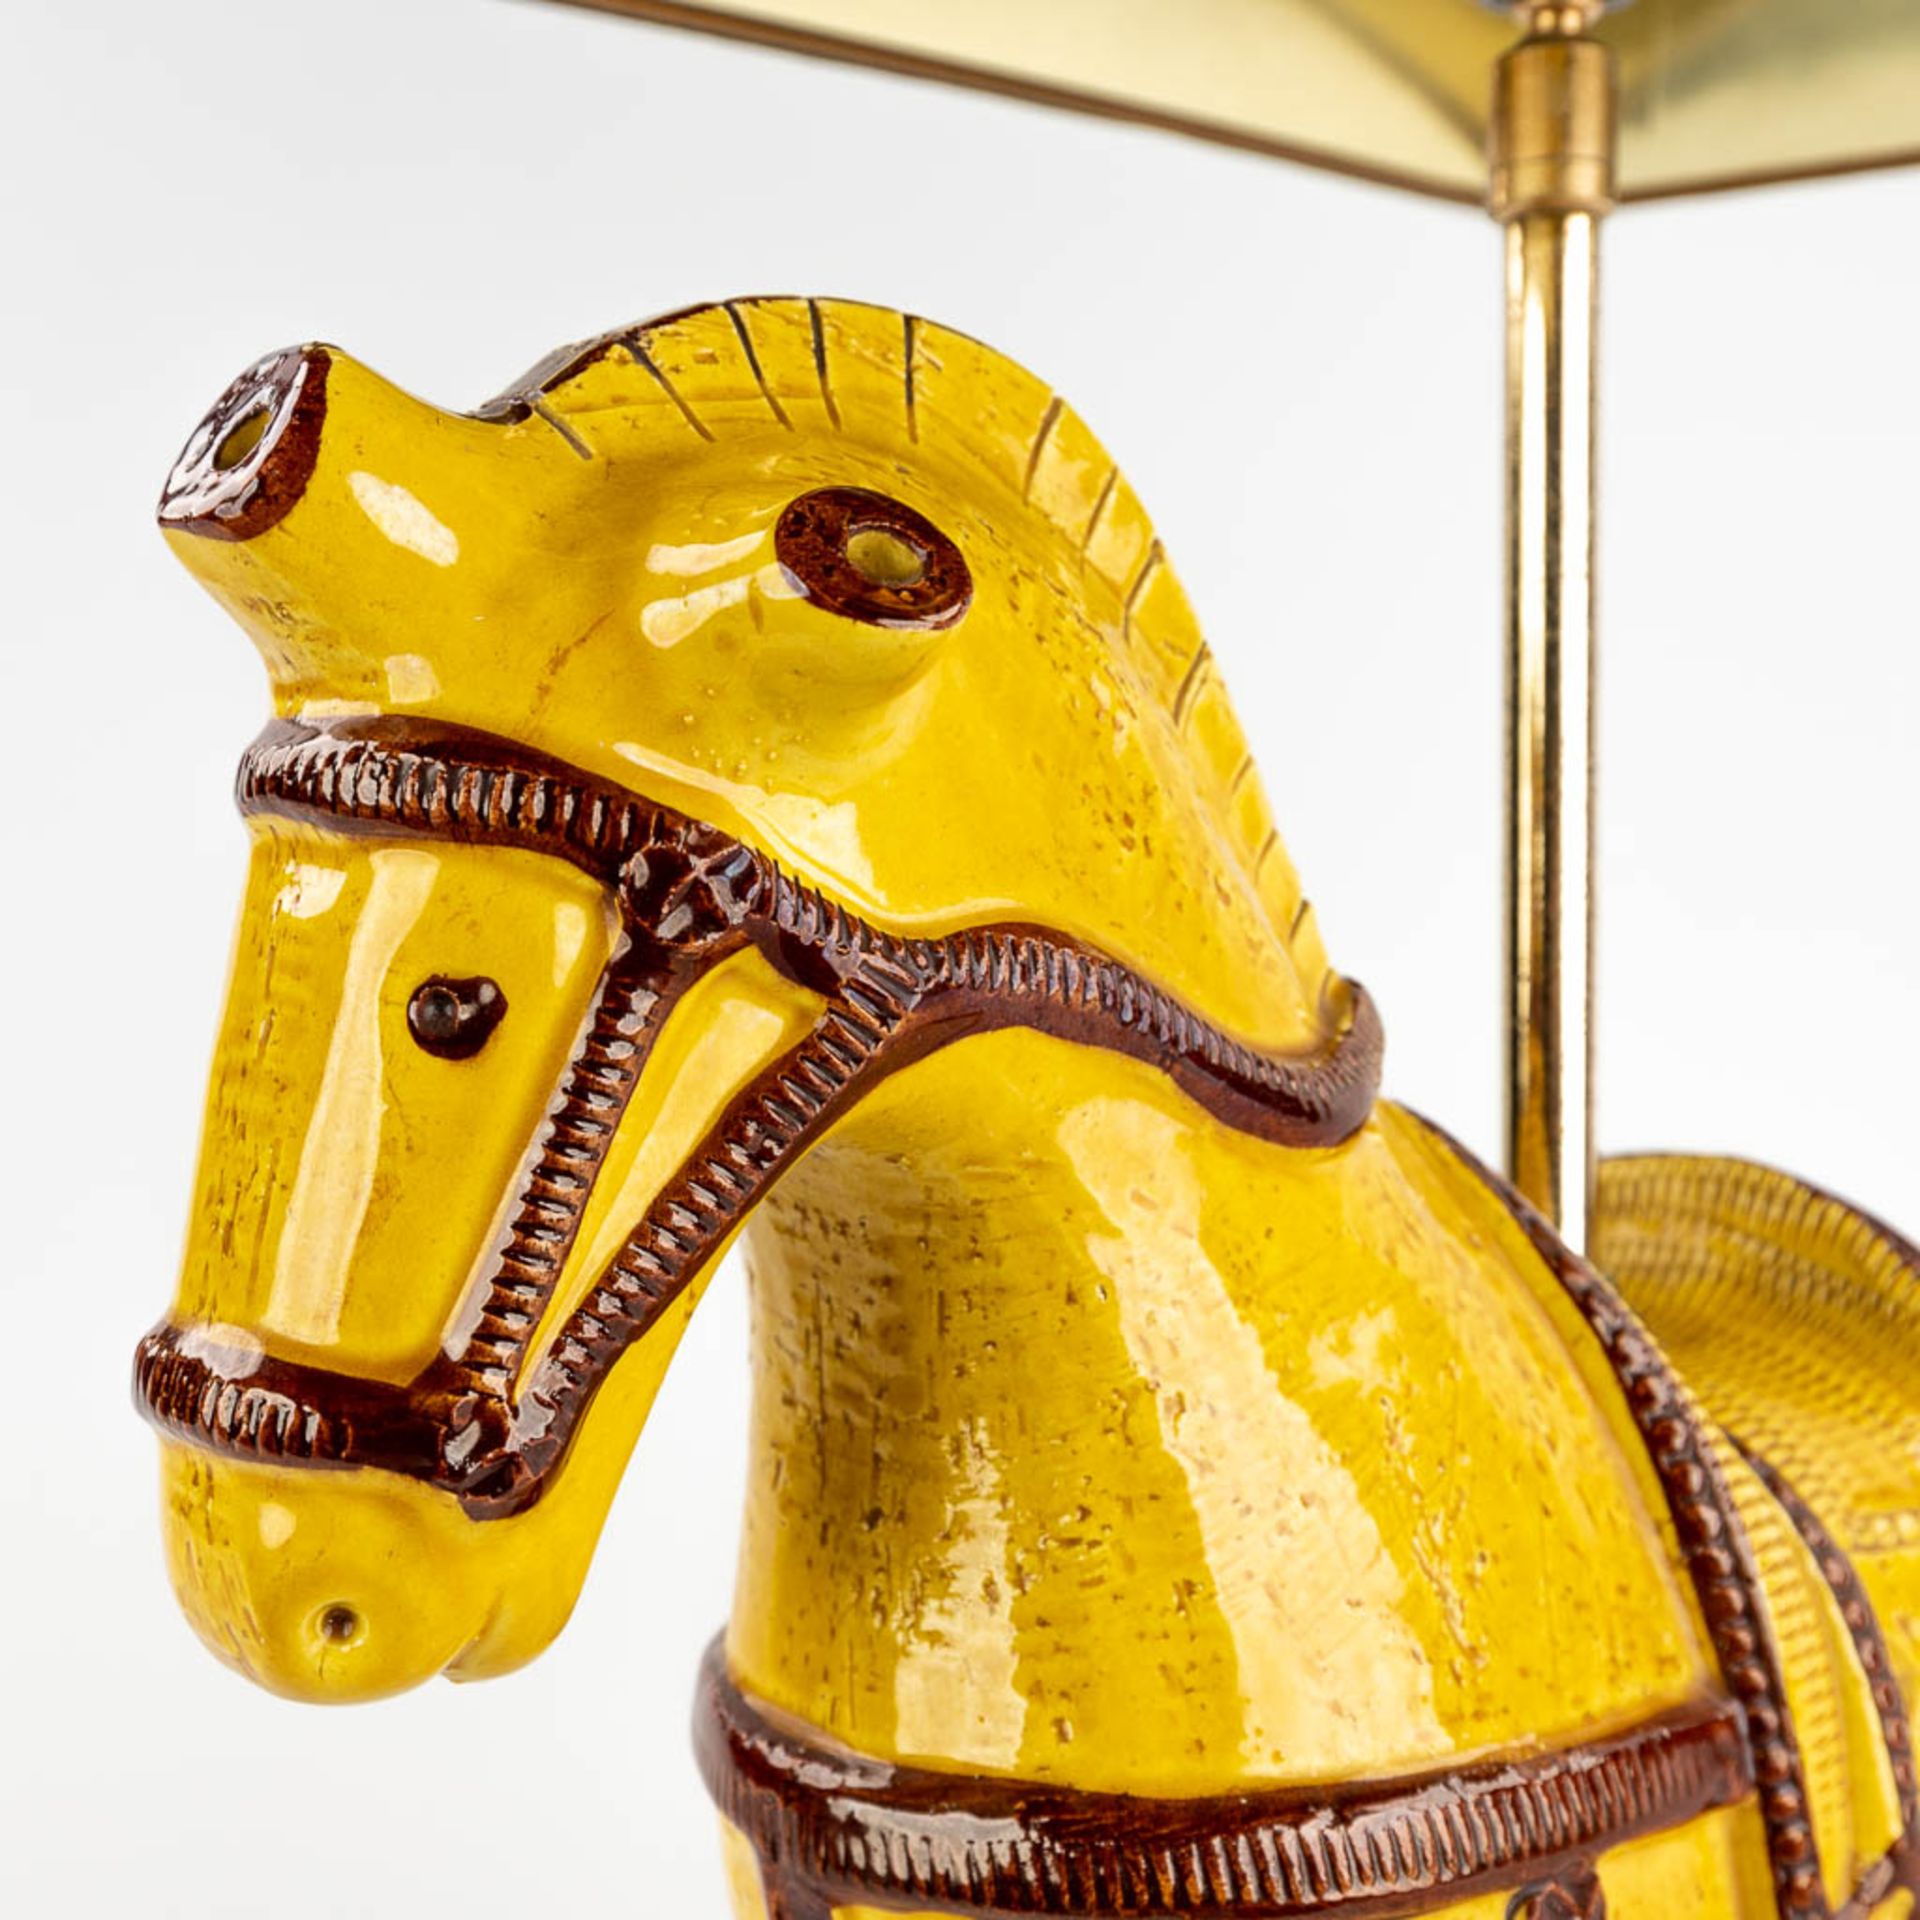 Aldo LONDI (1911-2003) 'Table Lamp with a yellow horse' for Bitossi. (D:12 x W:30 x H:32 cm) - Image 7 of 12